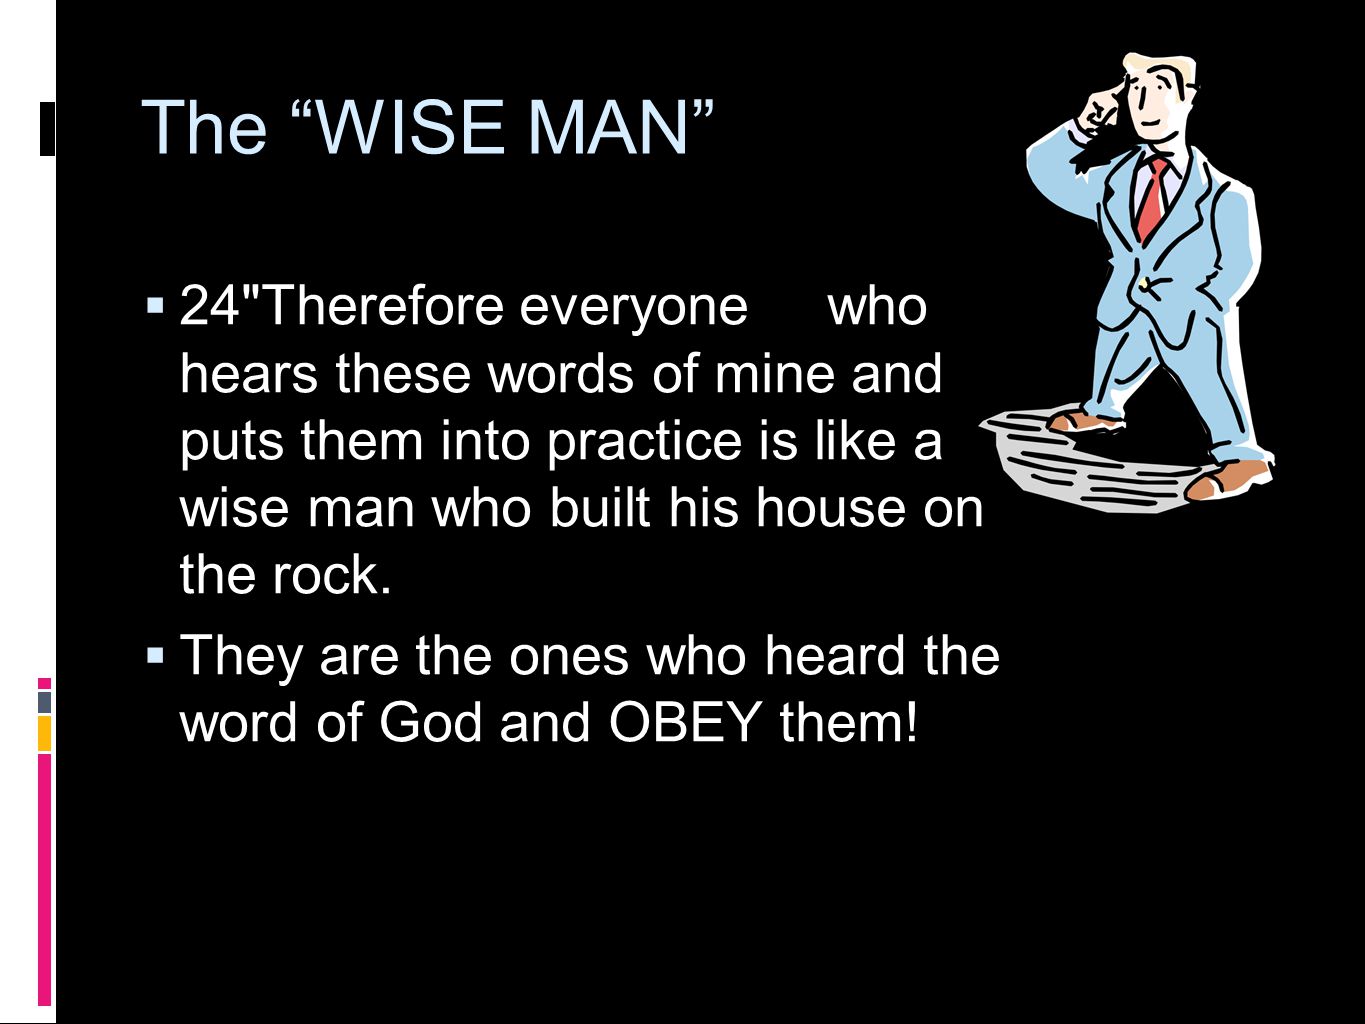 The WISE MAN  24 Therefore everyone who hears these words of mine and puts them into practice is like a wise man who built his house on the rock.